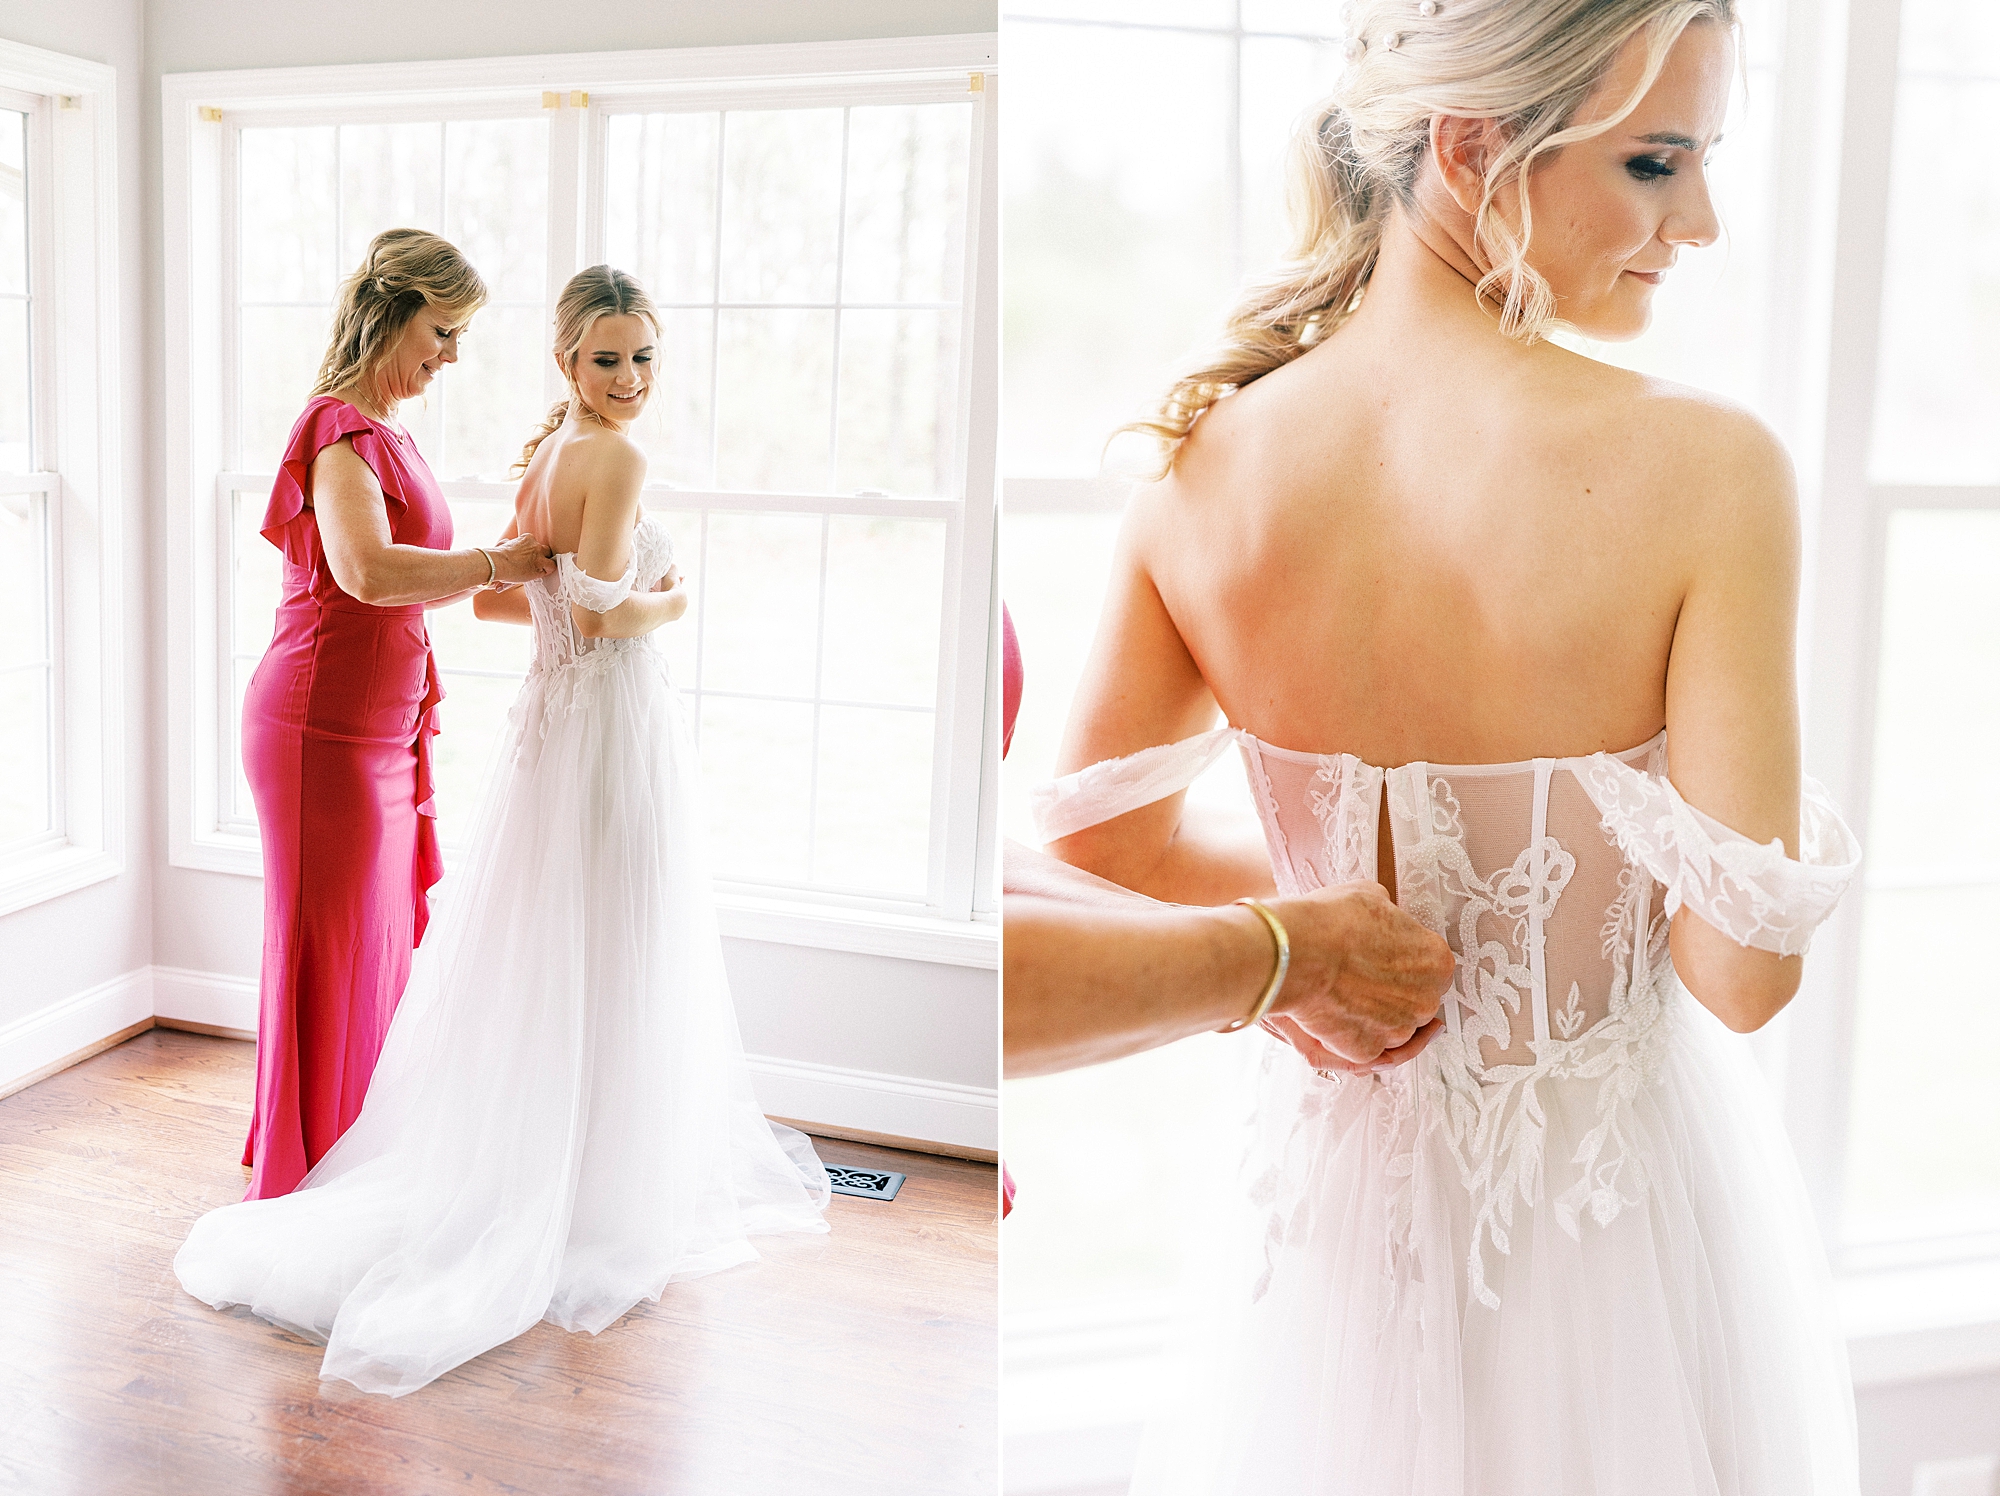 woman in red dress helps bride into corset wedding gown 